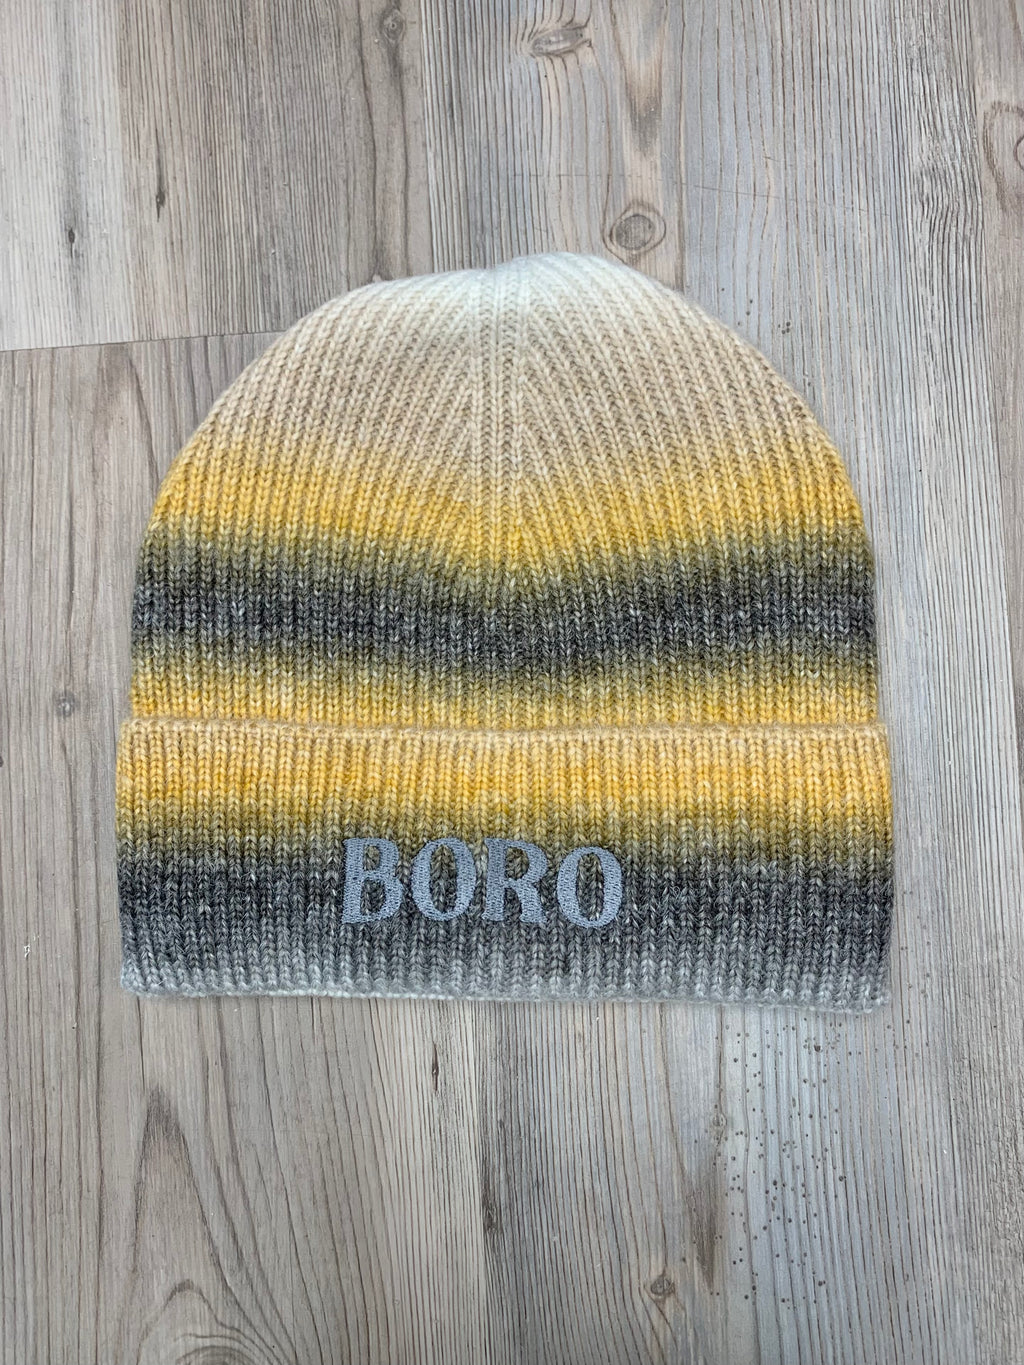 Ombre Boro Embroidered Beanies